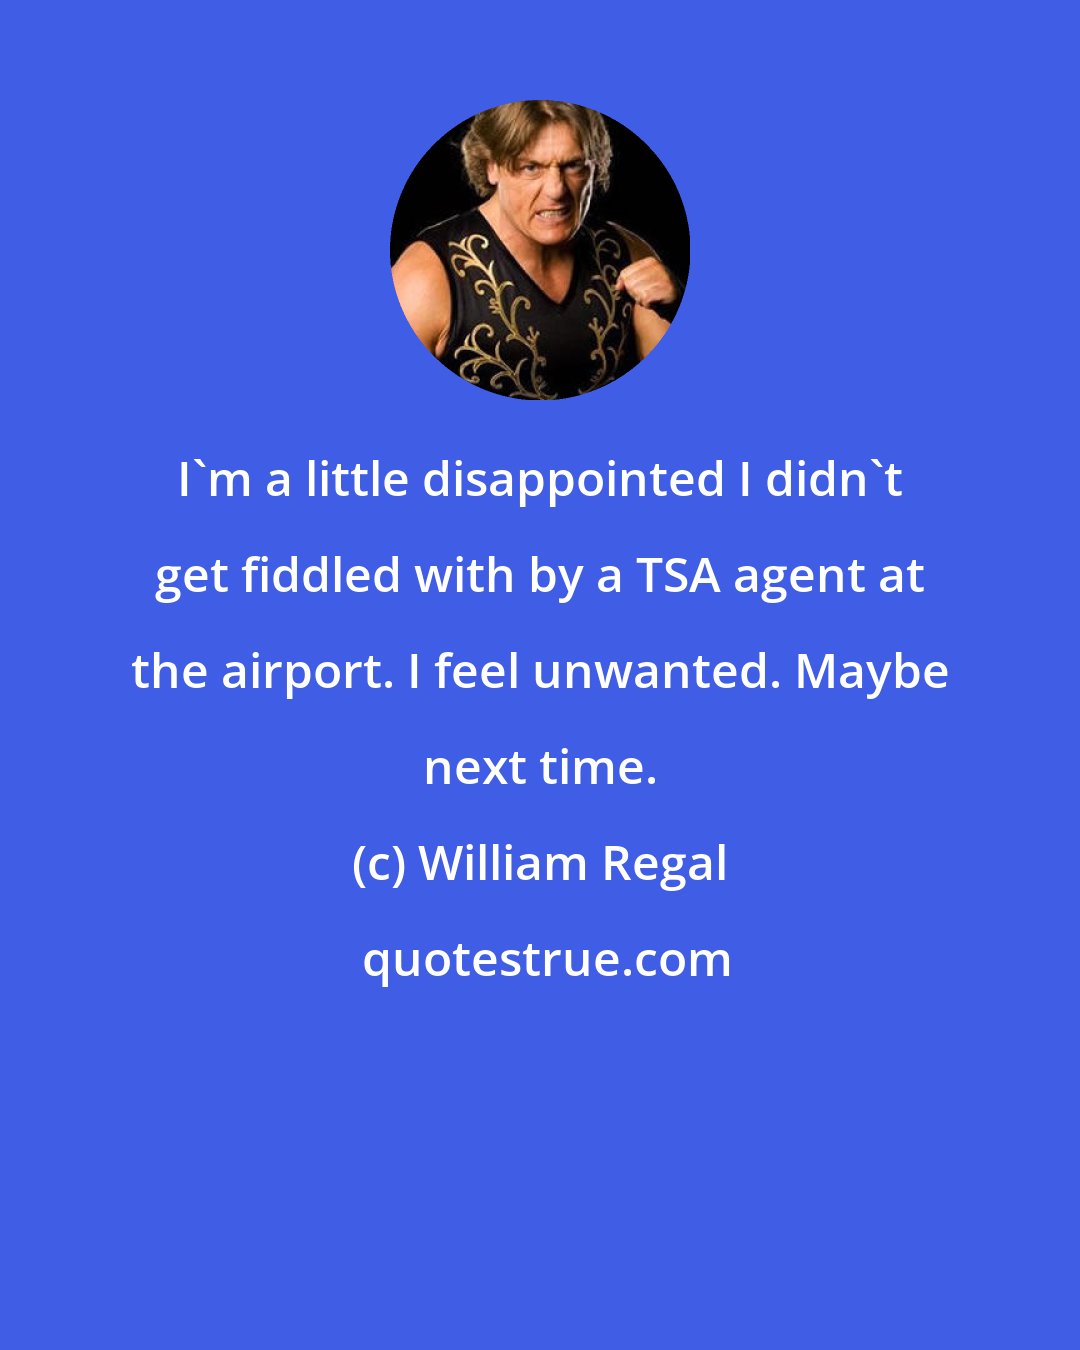 William Regal: I'm a little disappointed I didn't get fiddled with by a TSA agent at the airport. I feel unwanted. Maybe next time.